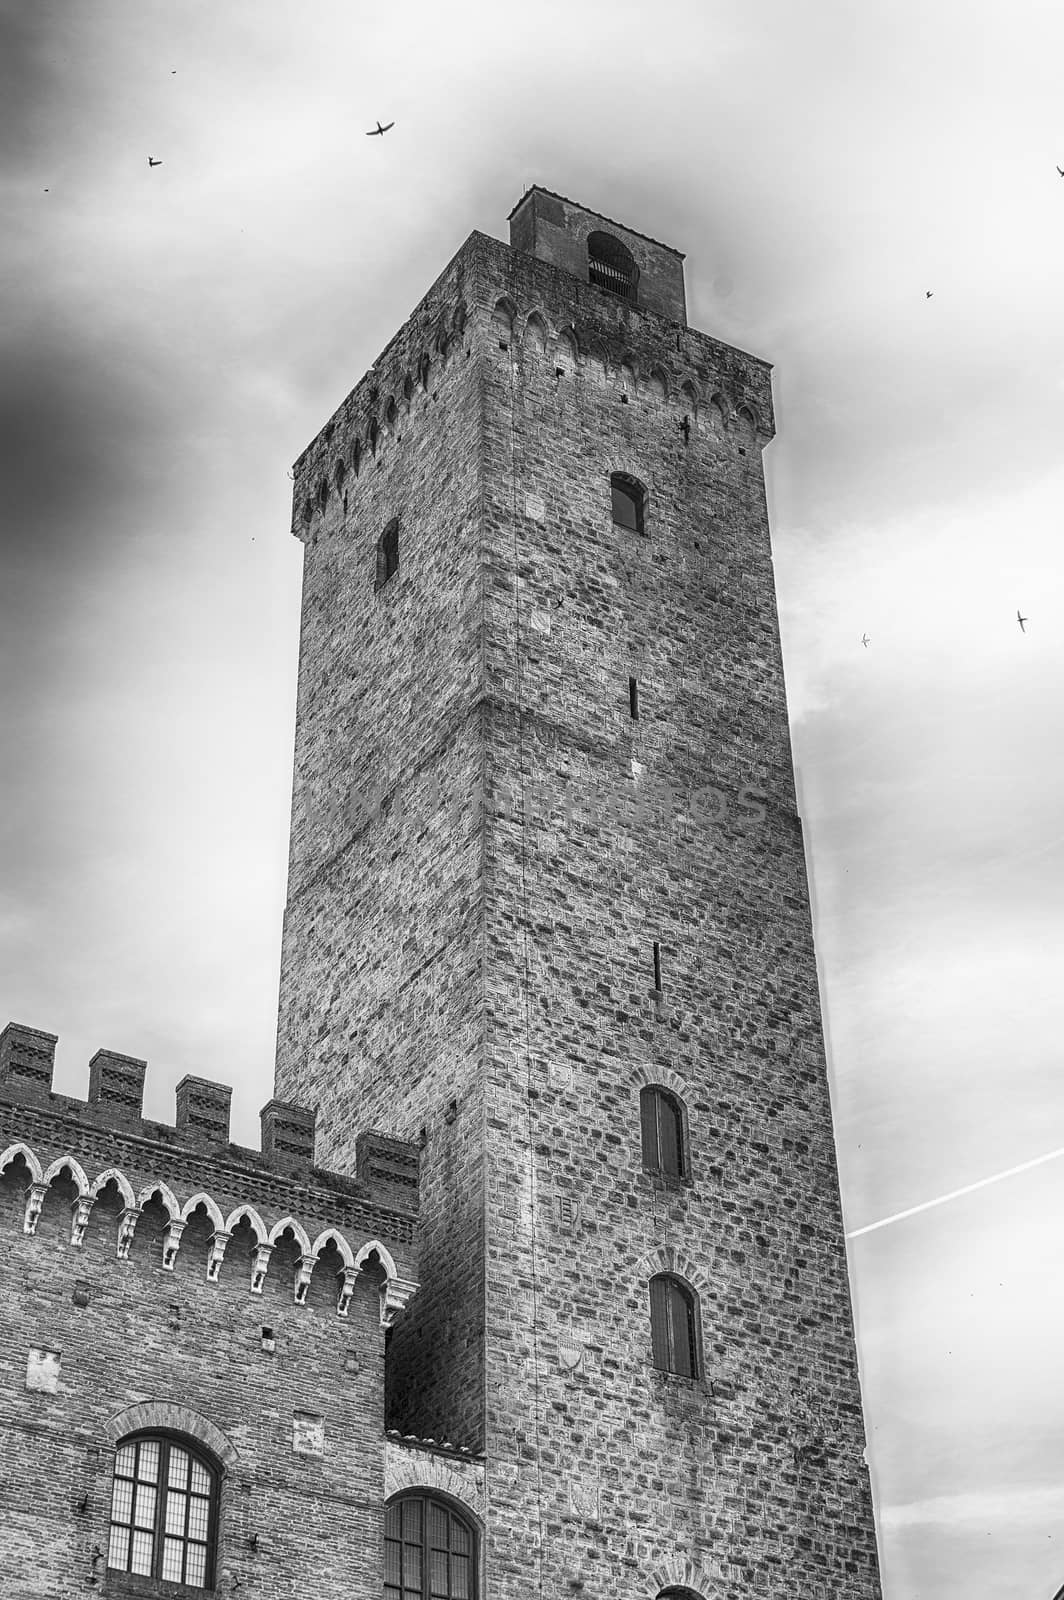 View of Torre Grossa, the tallest medieval tower and one of the main attractions in the central square of San Gimignano, Tuscany, Italy